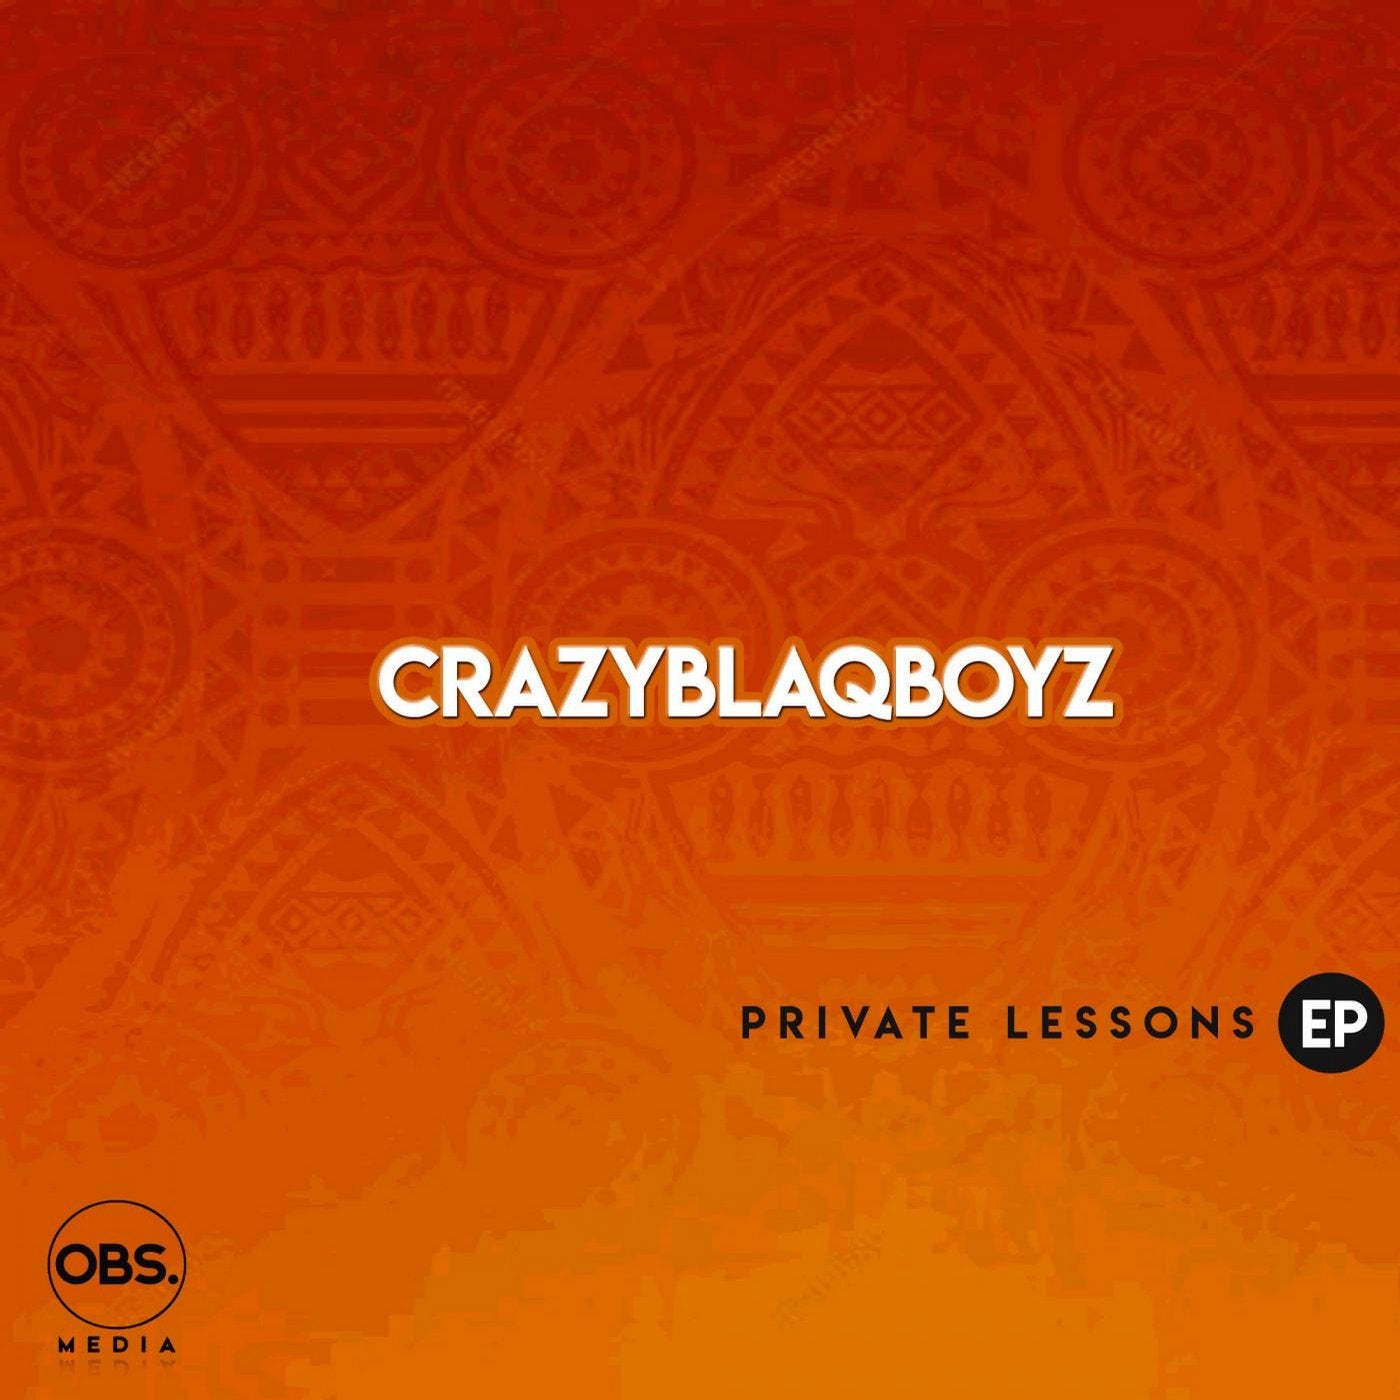 Private Lessons EP